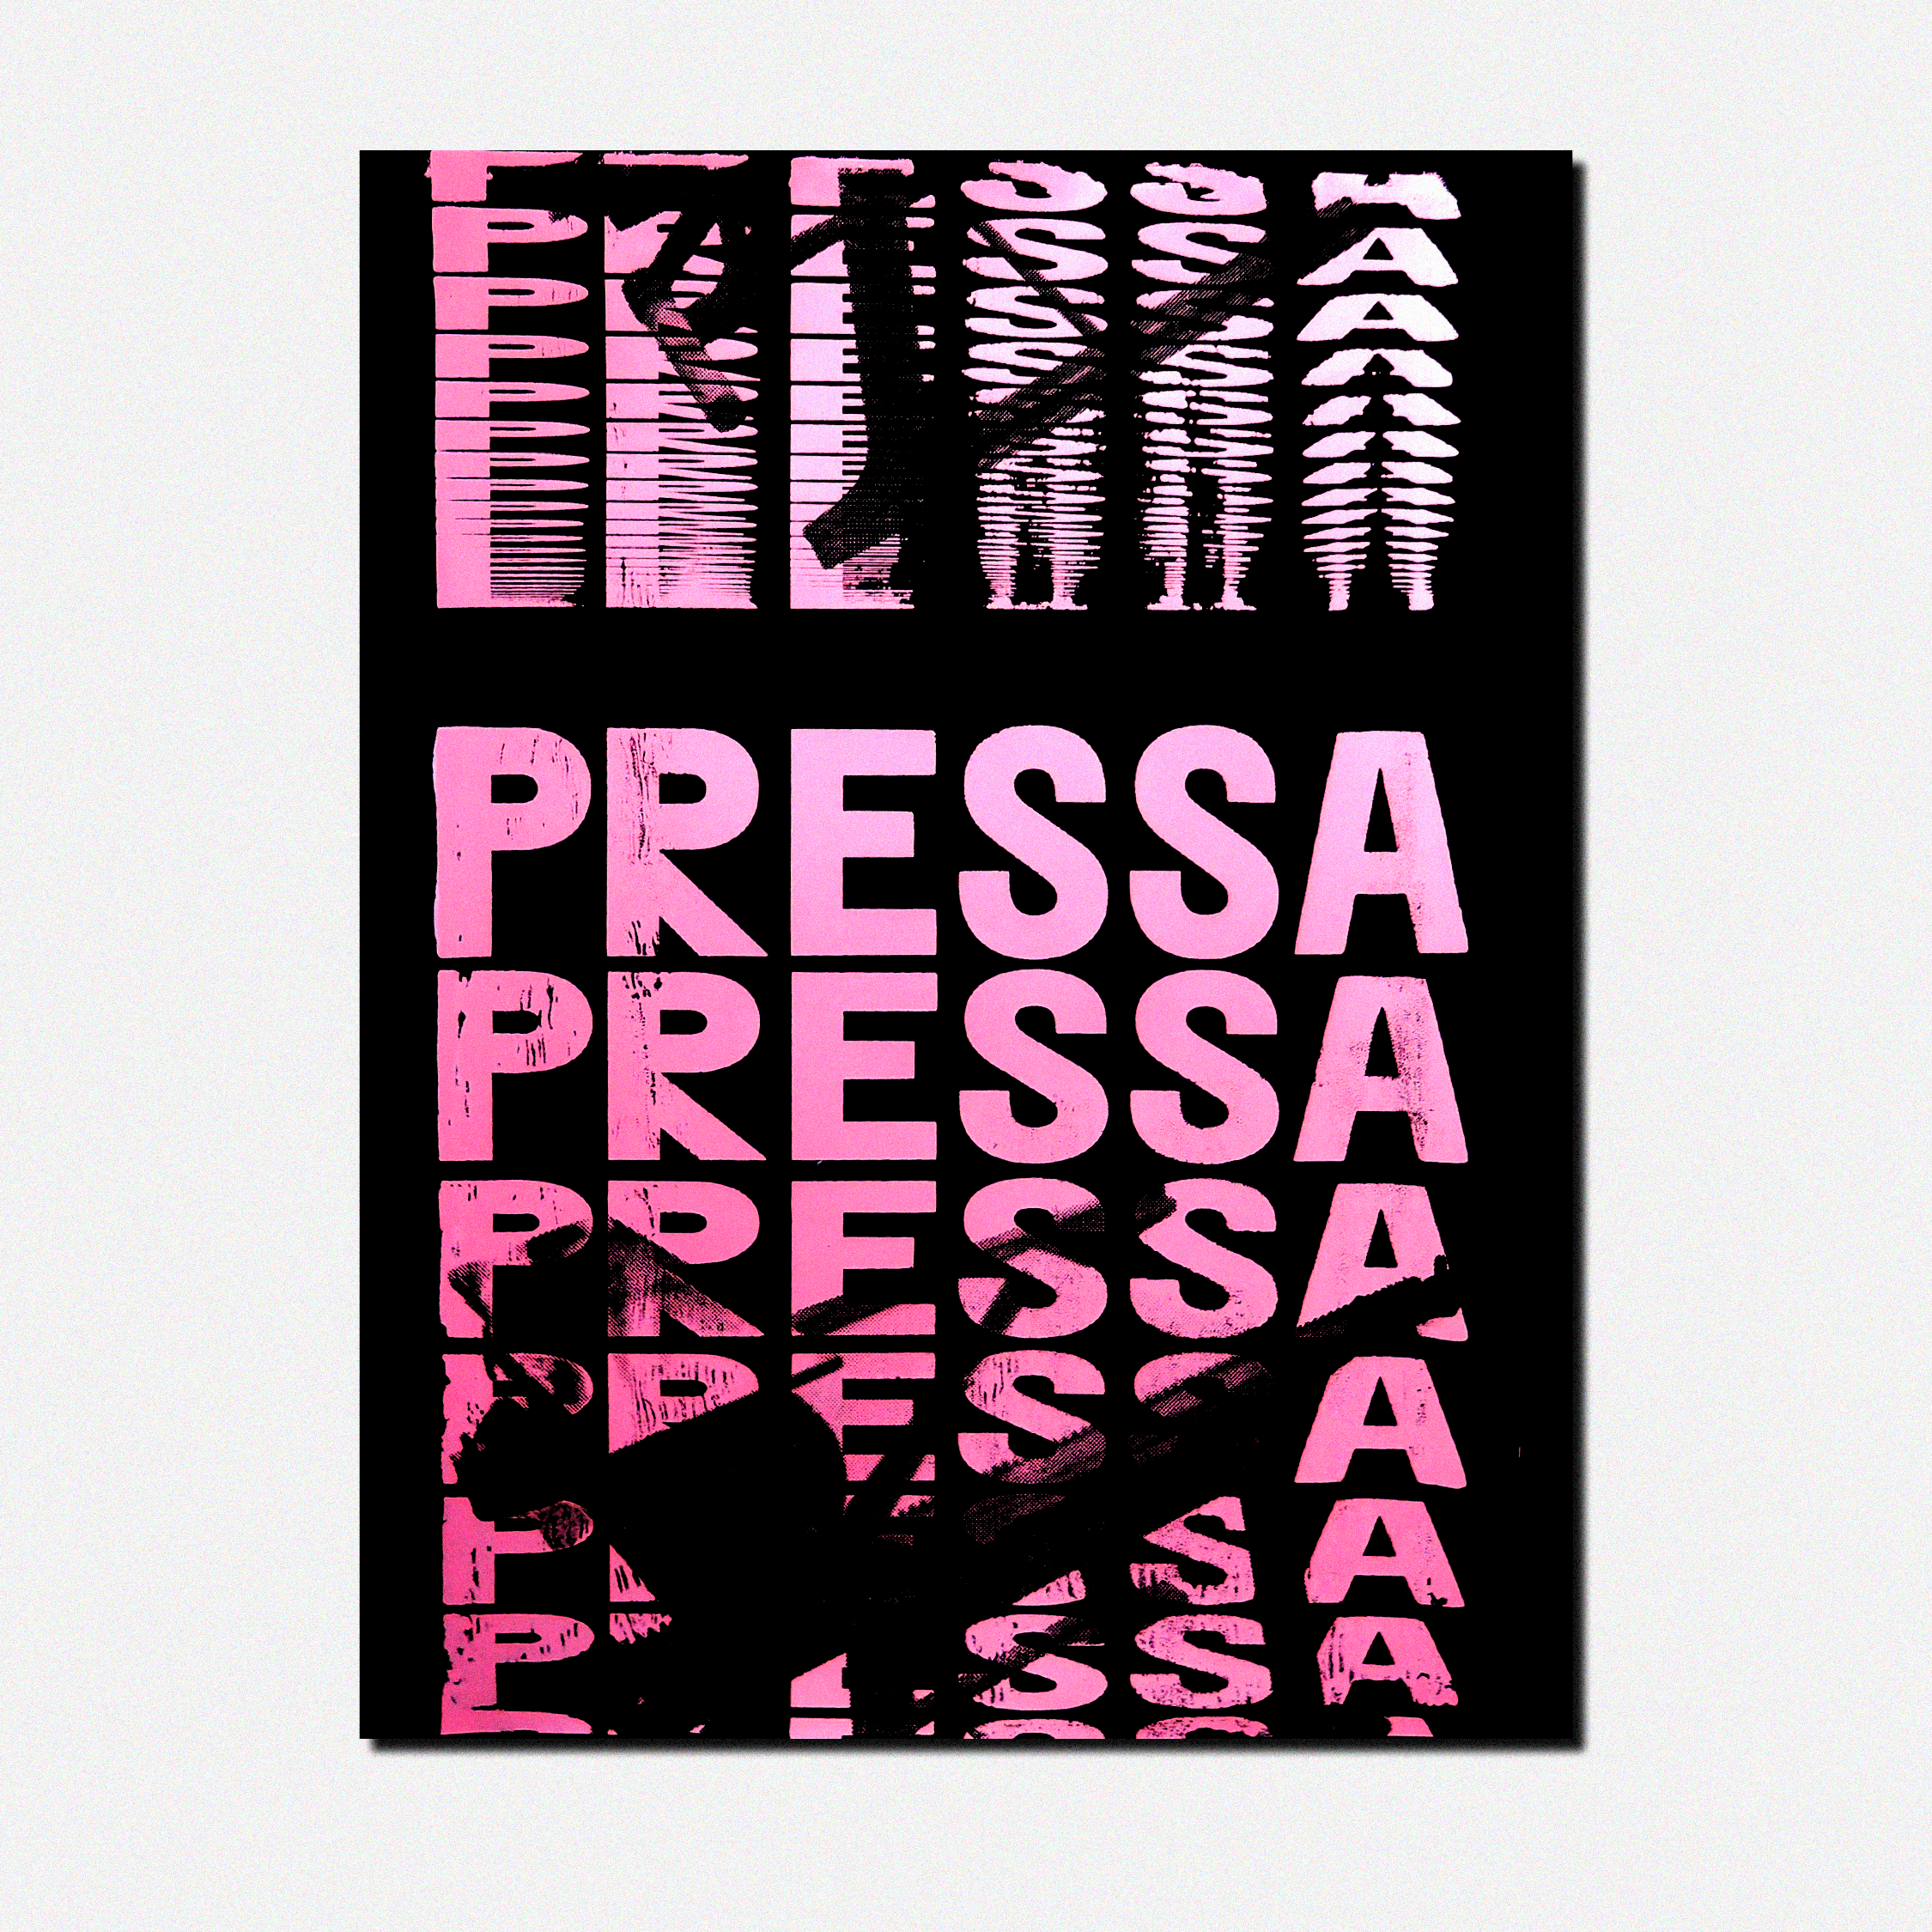 Silkscreen print and poster designs for workshop exhibit Pressa (Eng: Pressure) in Seyðisfjörður, Iceland 2020. A a printing press owned by Dieter Roth can be seen and I used ‘Seperat’—a beautiful typeface by Or Type—in a playful way.